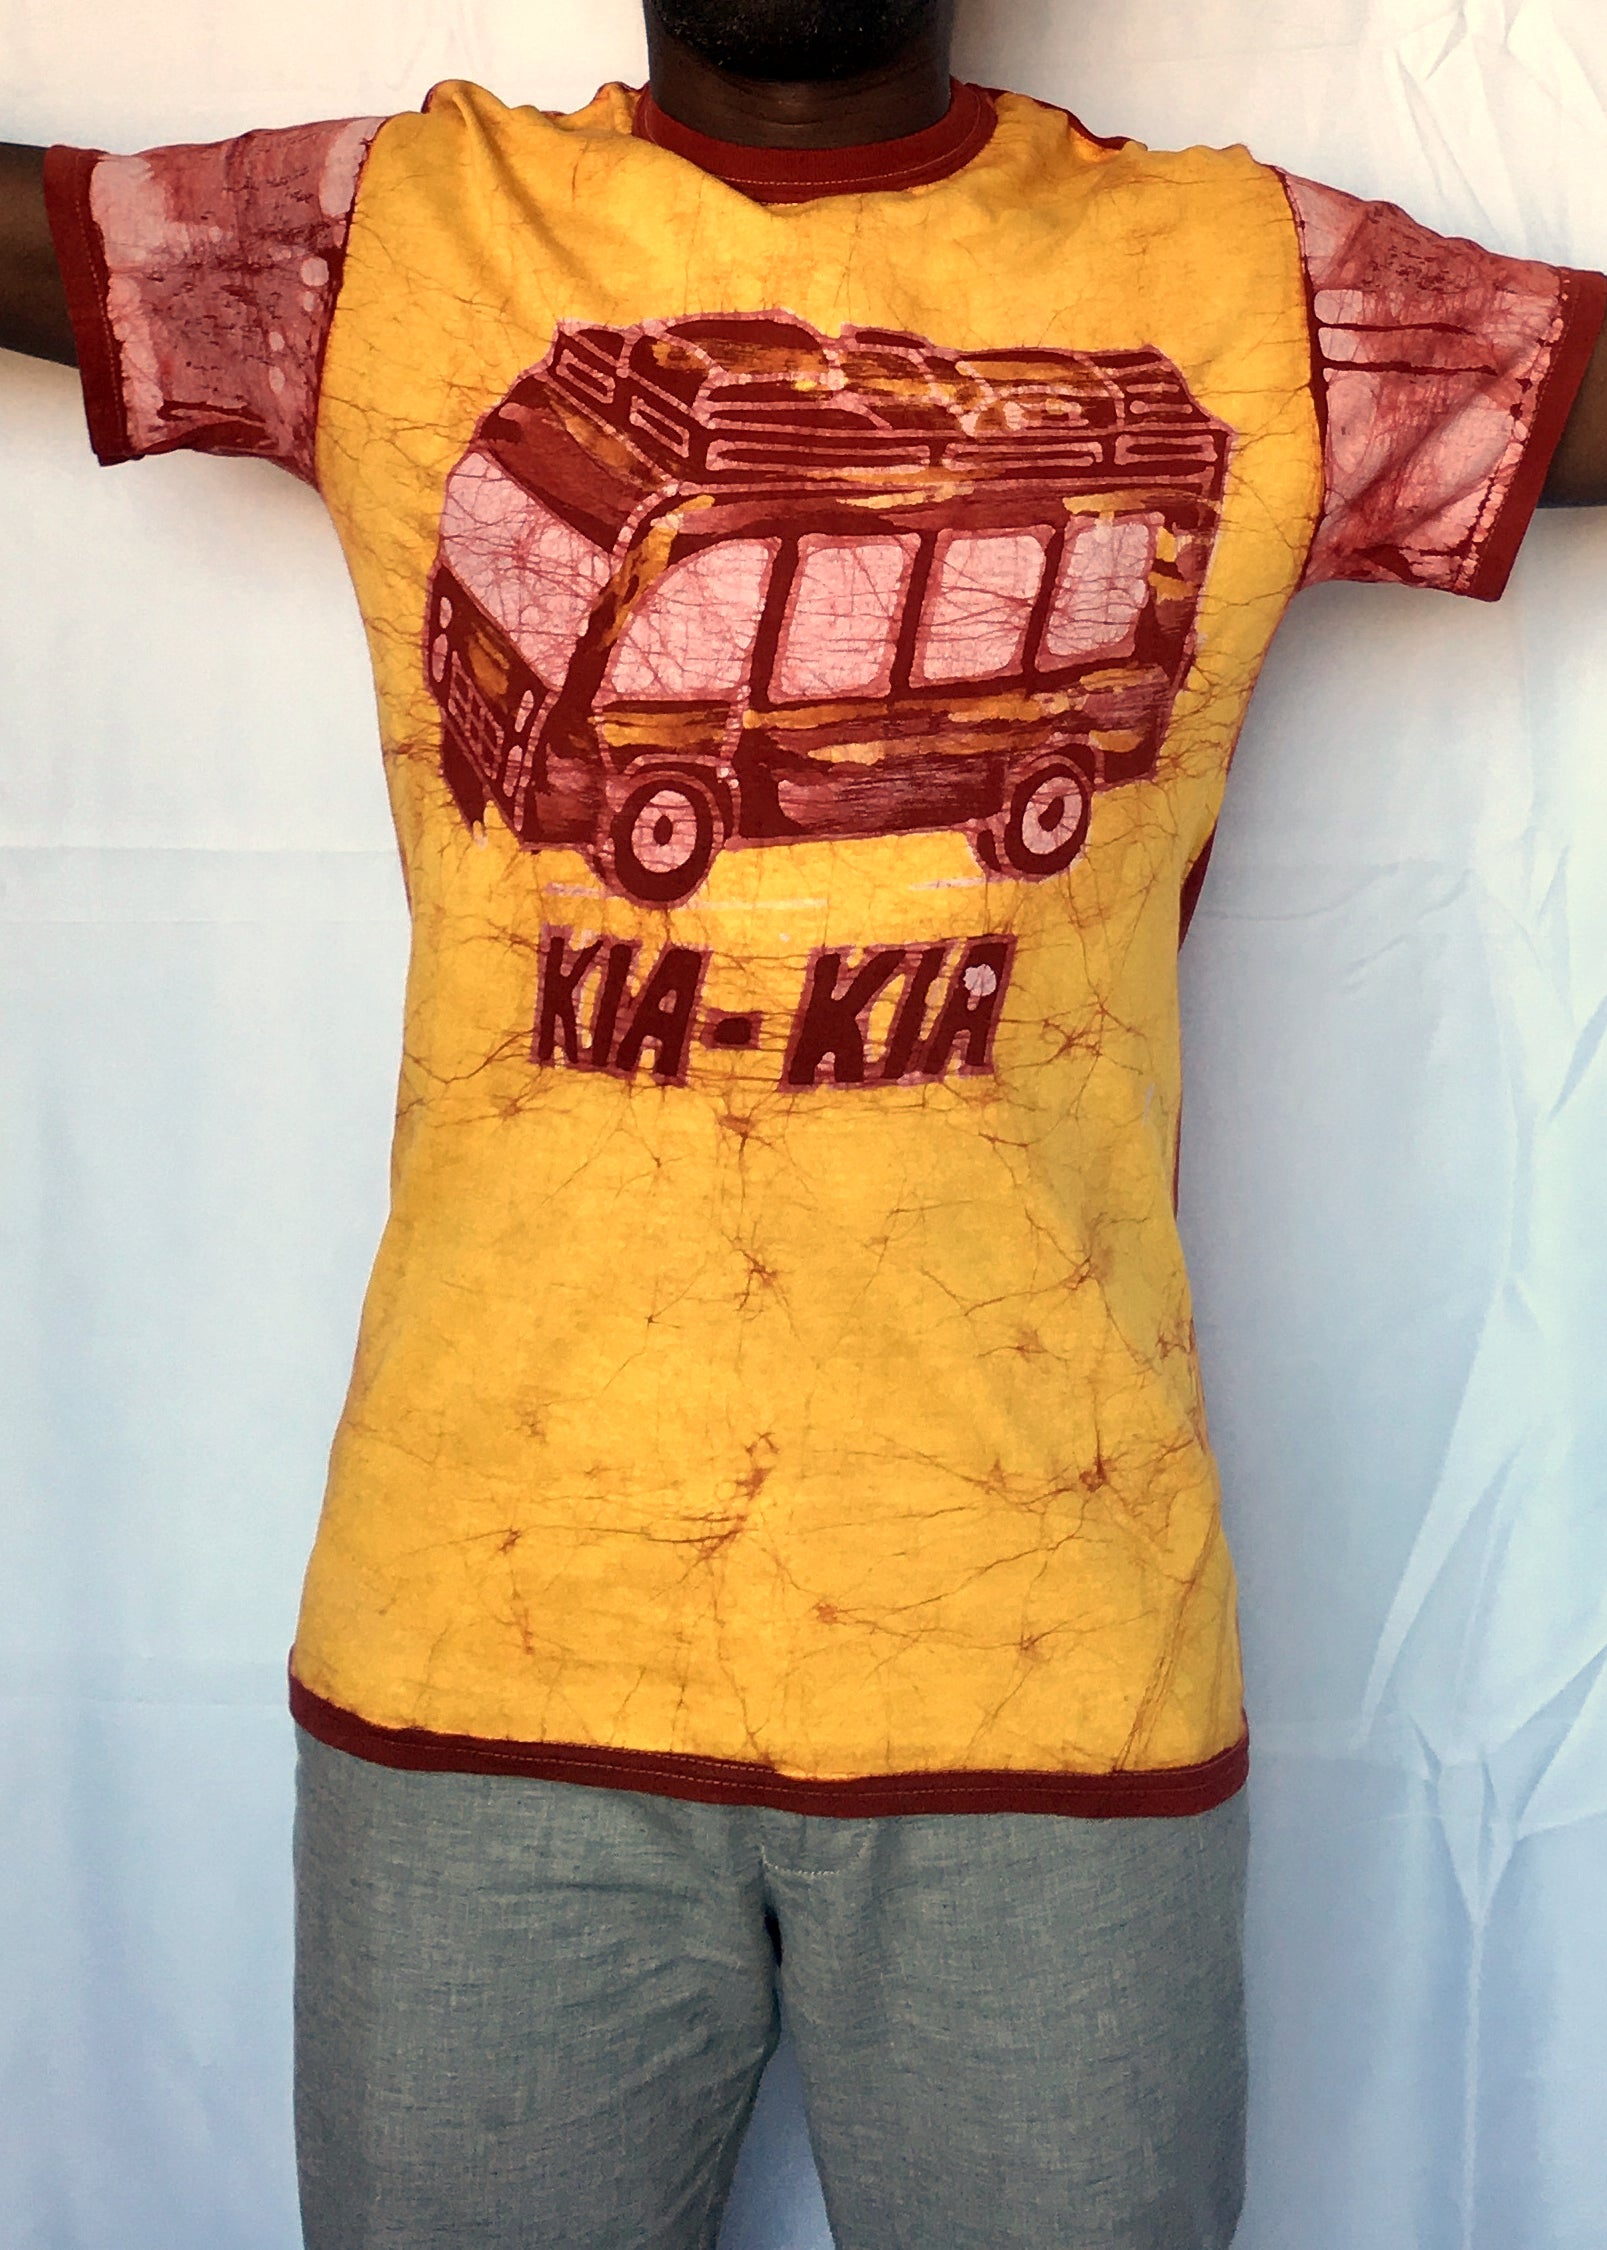 Kia Kia Short Sleeves Batik T-Shirt -Contemporary and Colorful Ensemble-African apparel and accessories